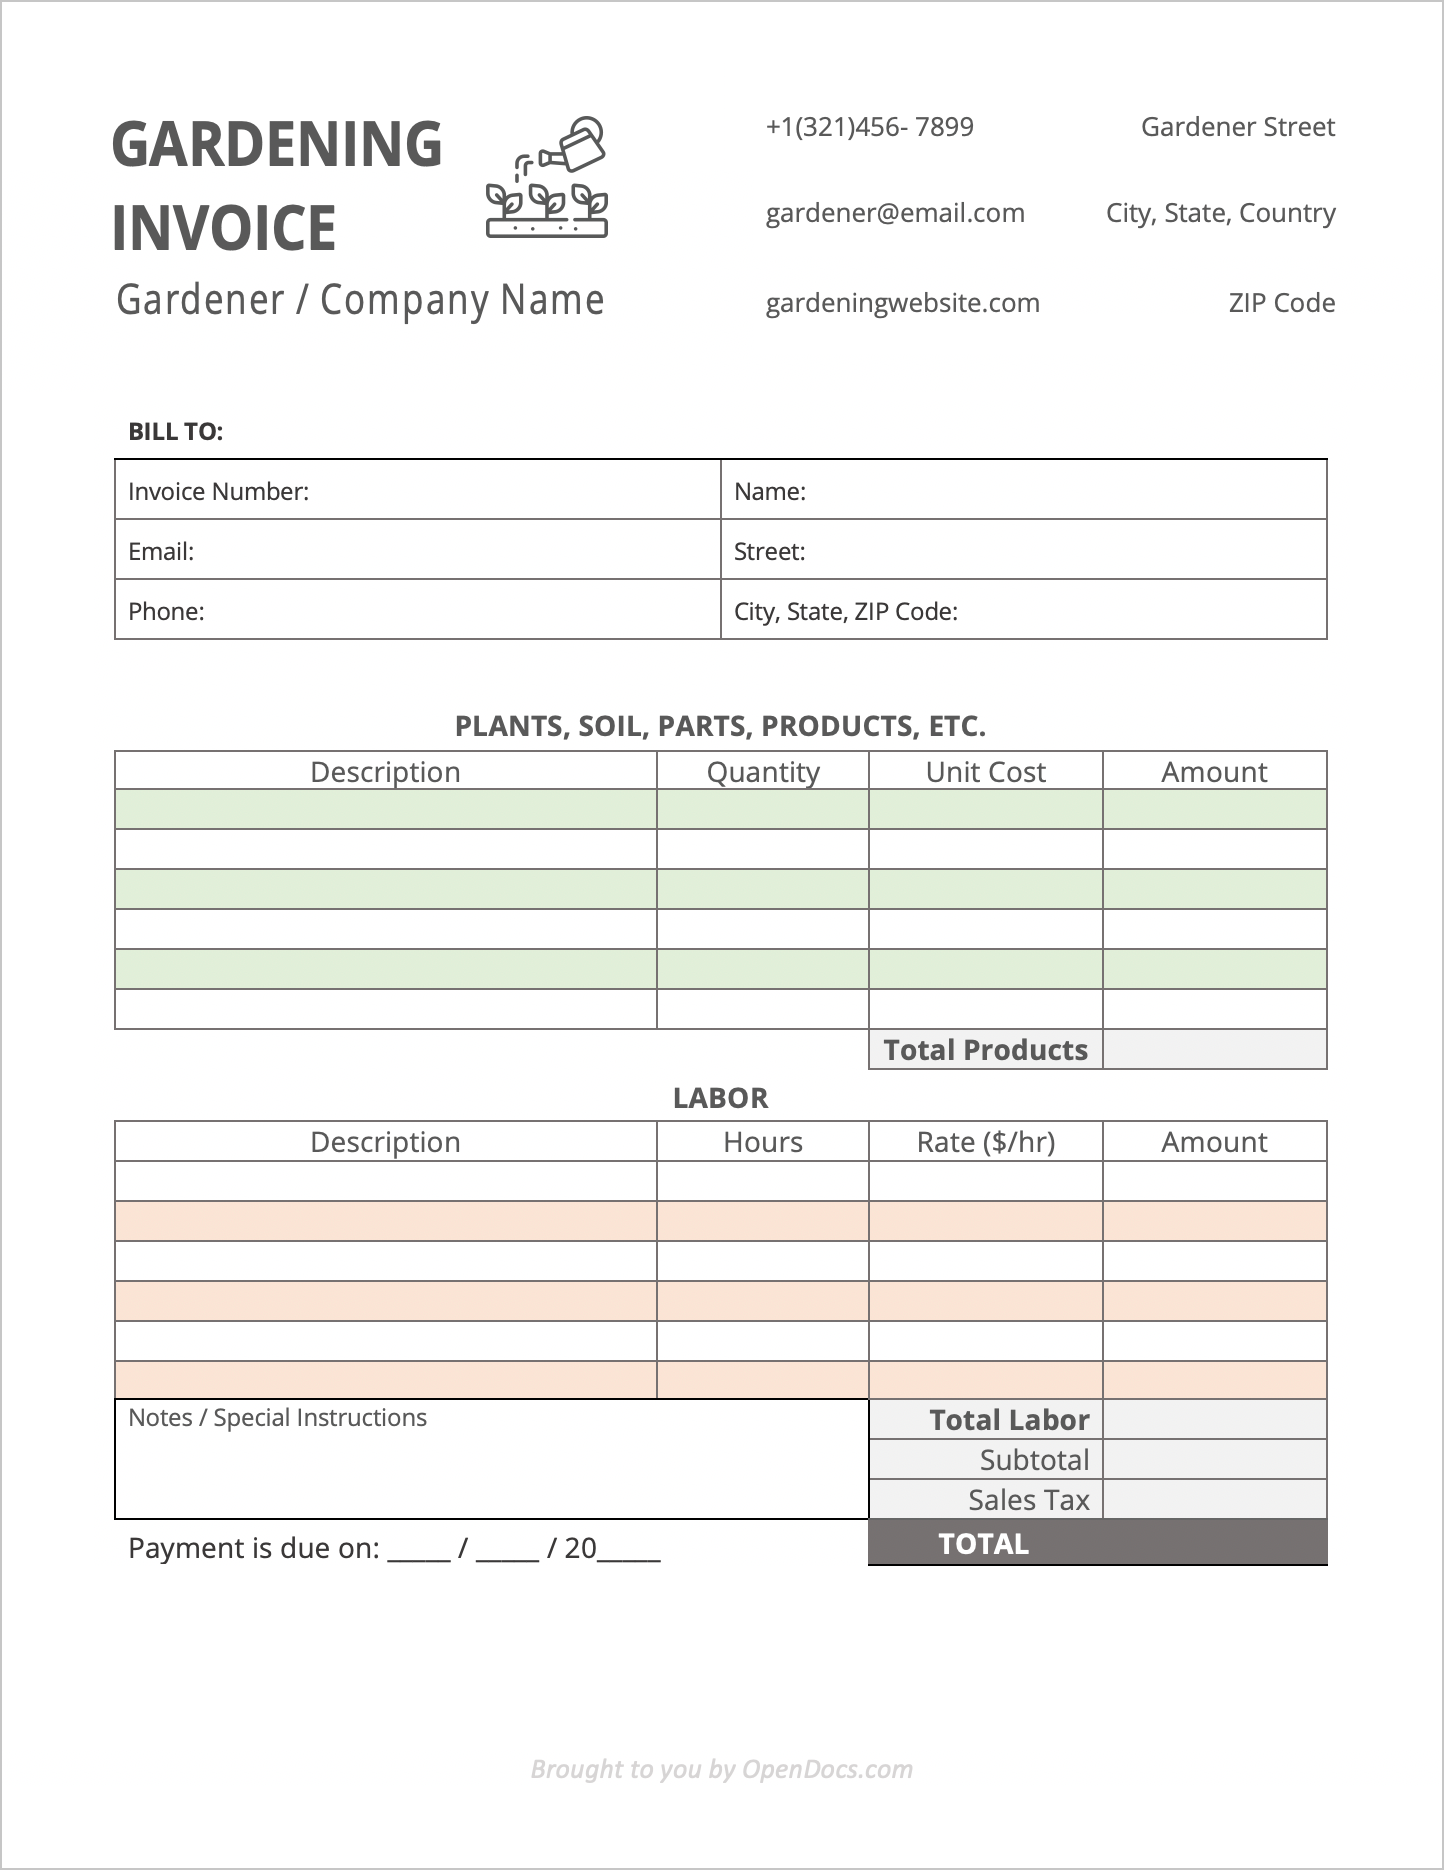 Free Gardening Invoice Template  PDF  WORD  EXCEL Pertaining To Gardening Invoice Template